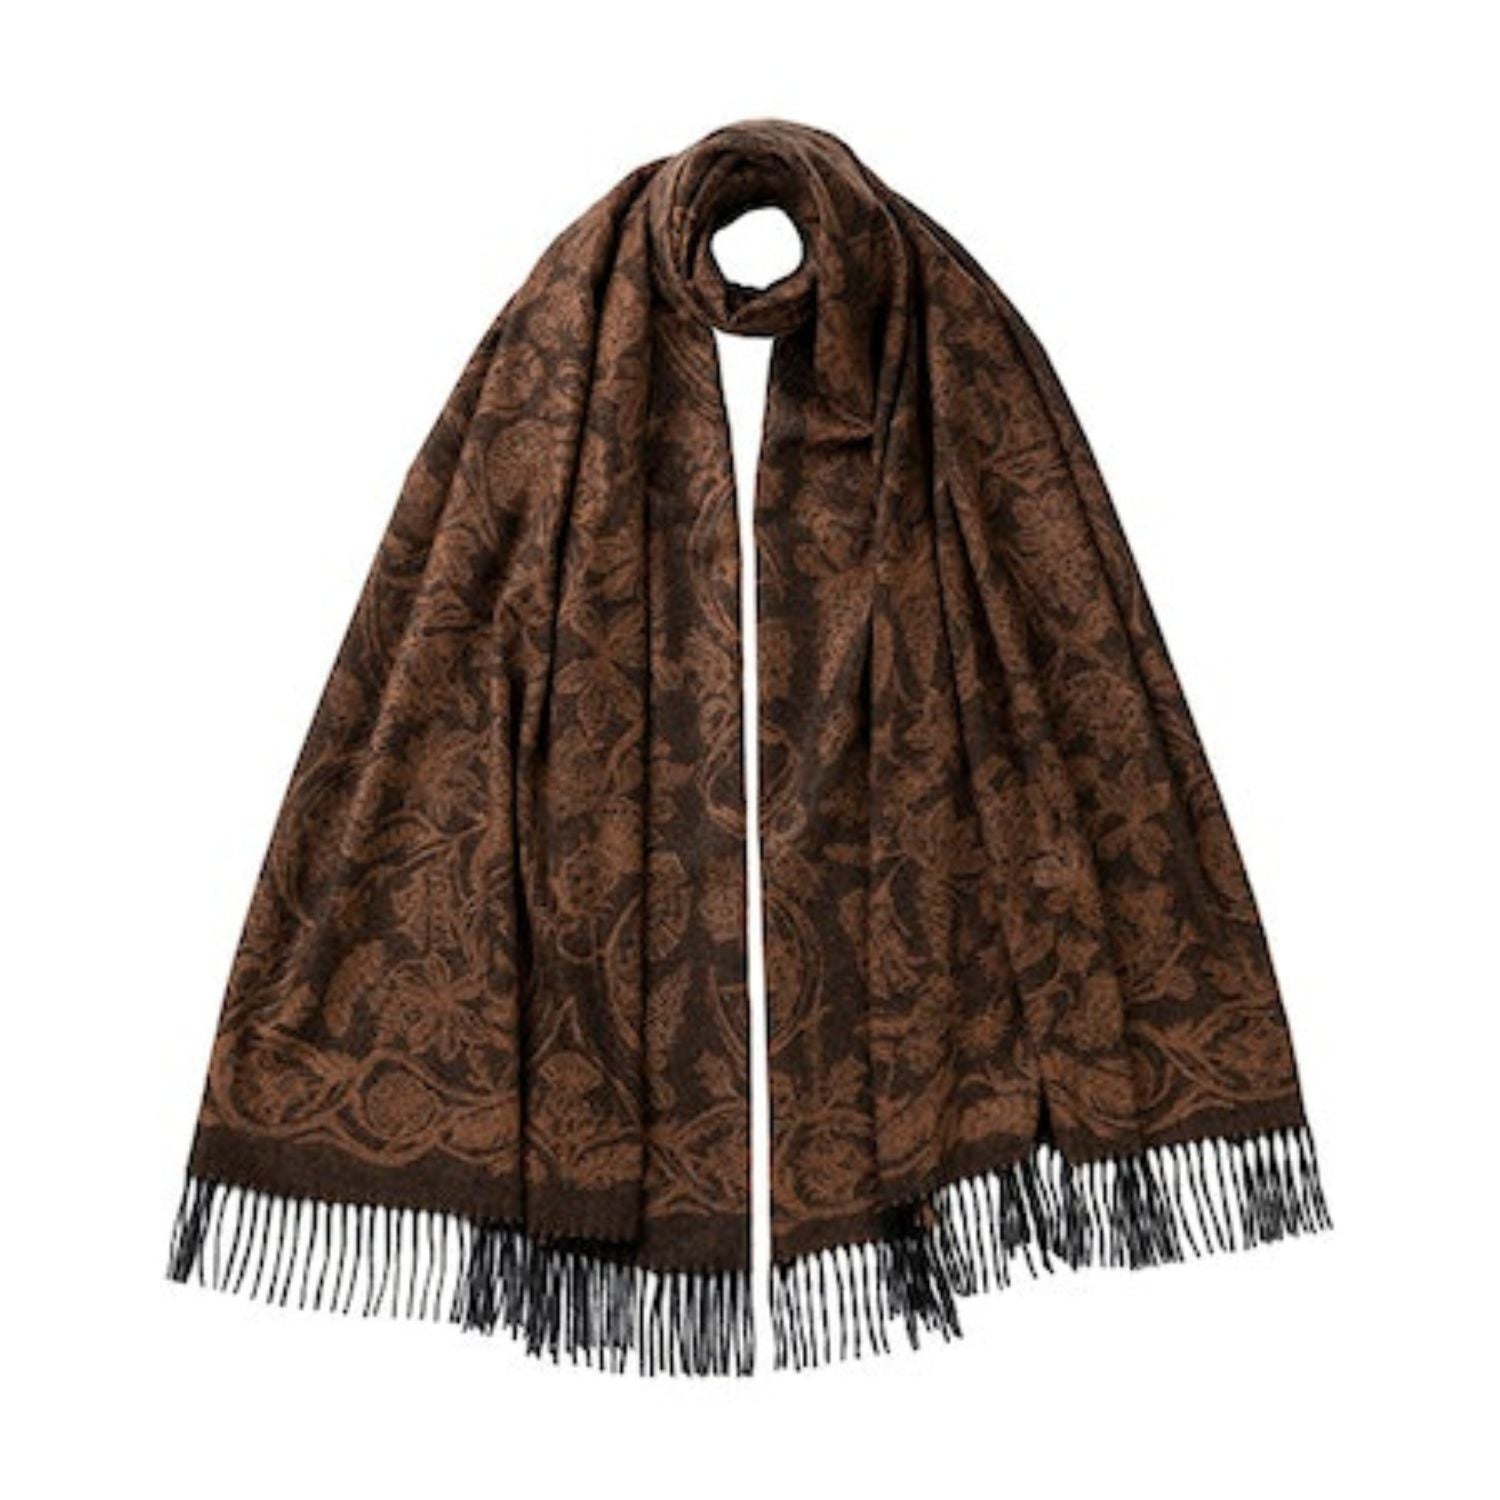 Johnsons of Elgin | Tree of Life Cashmere Stole | Dark Camel Cashmere Stole | Wrap | Large Scarf | buy at The Cashmere Choice | London